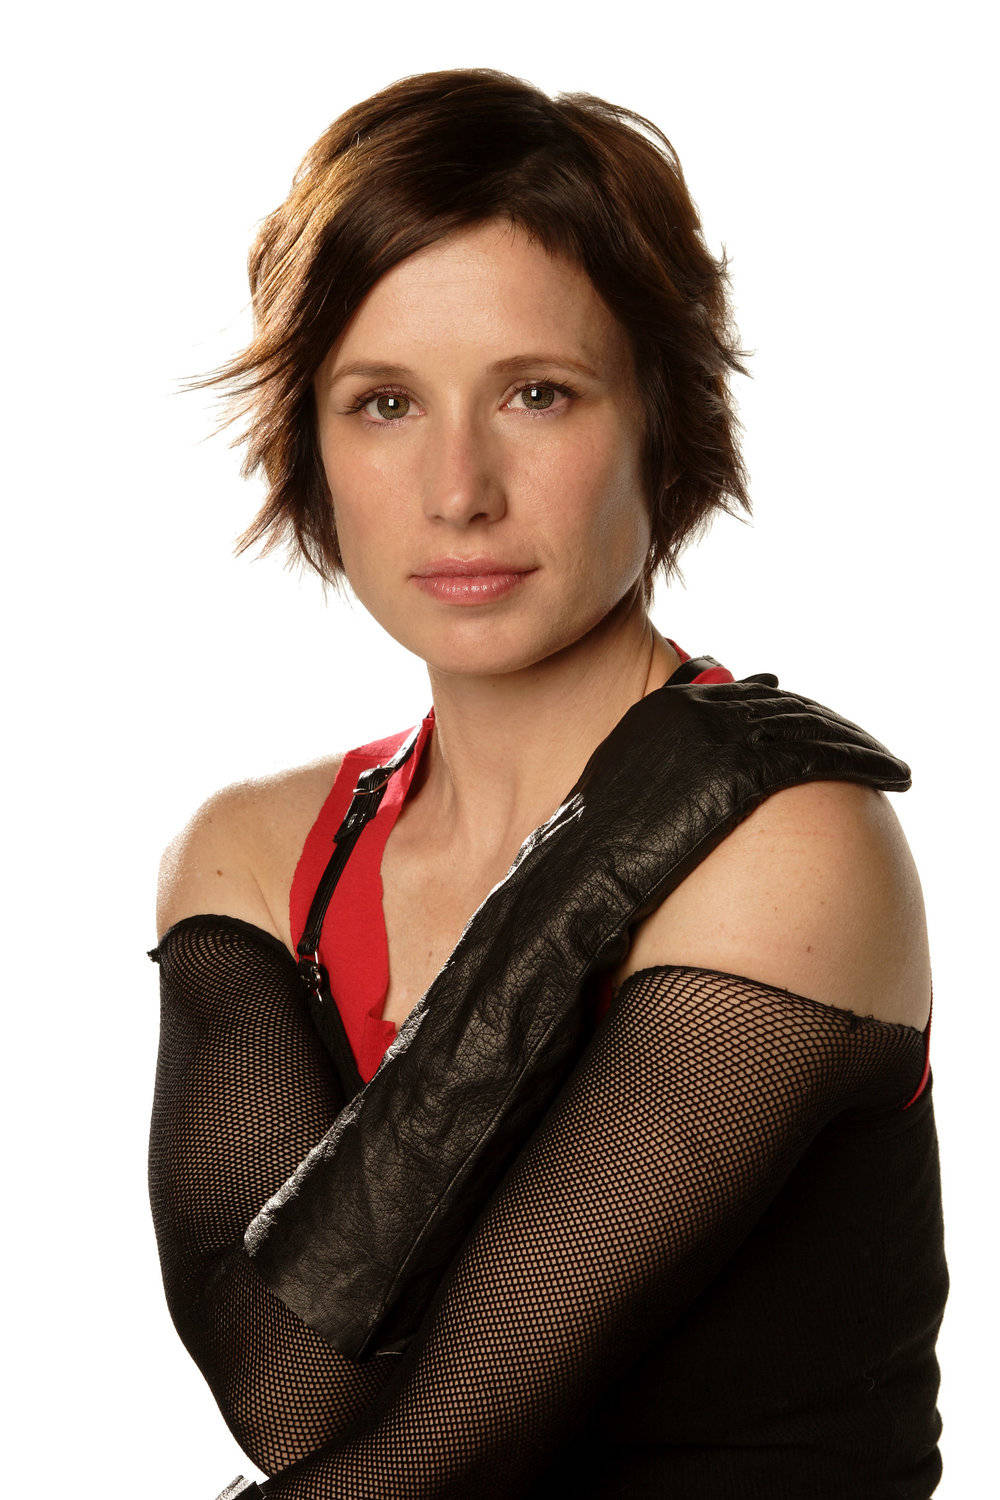 Shawneesmith Svarta Handskar (as A Potential Name For A Computer Or Mobile Wallpaper Featuring Shawnee Smith Wearing Black Gloves) Wallpaper